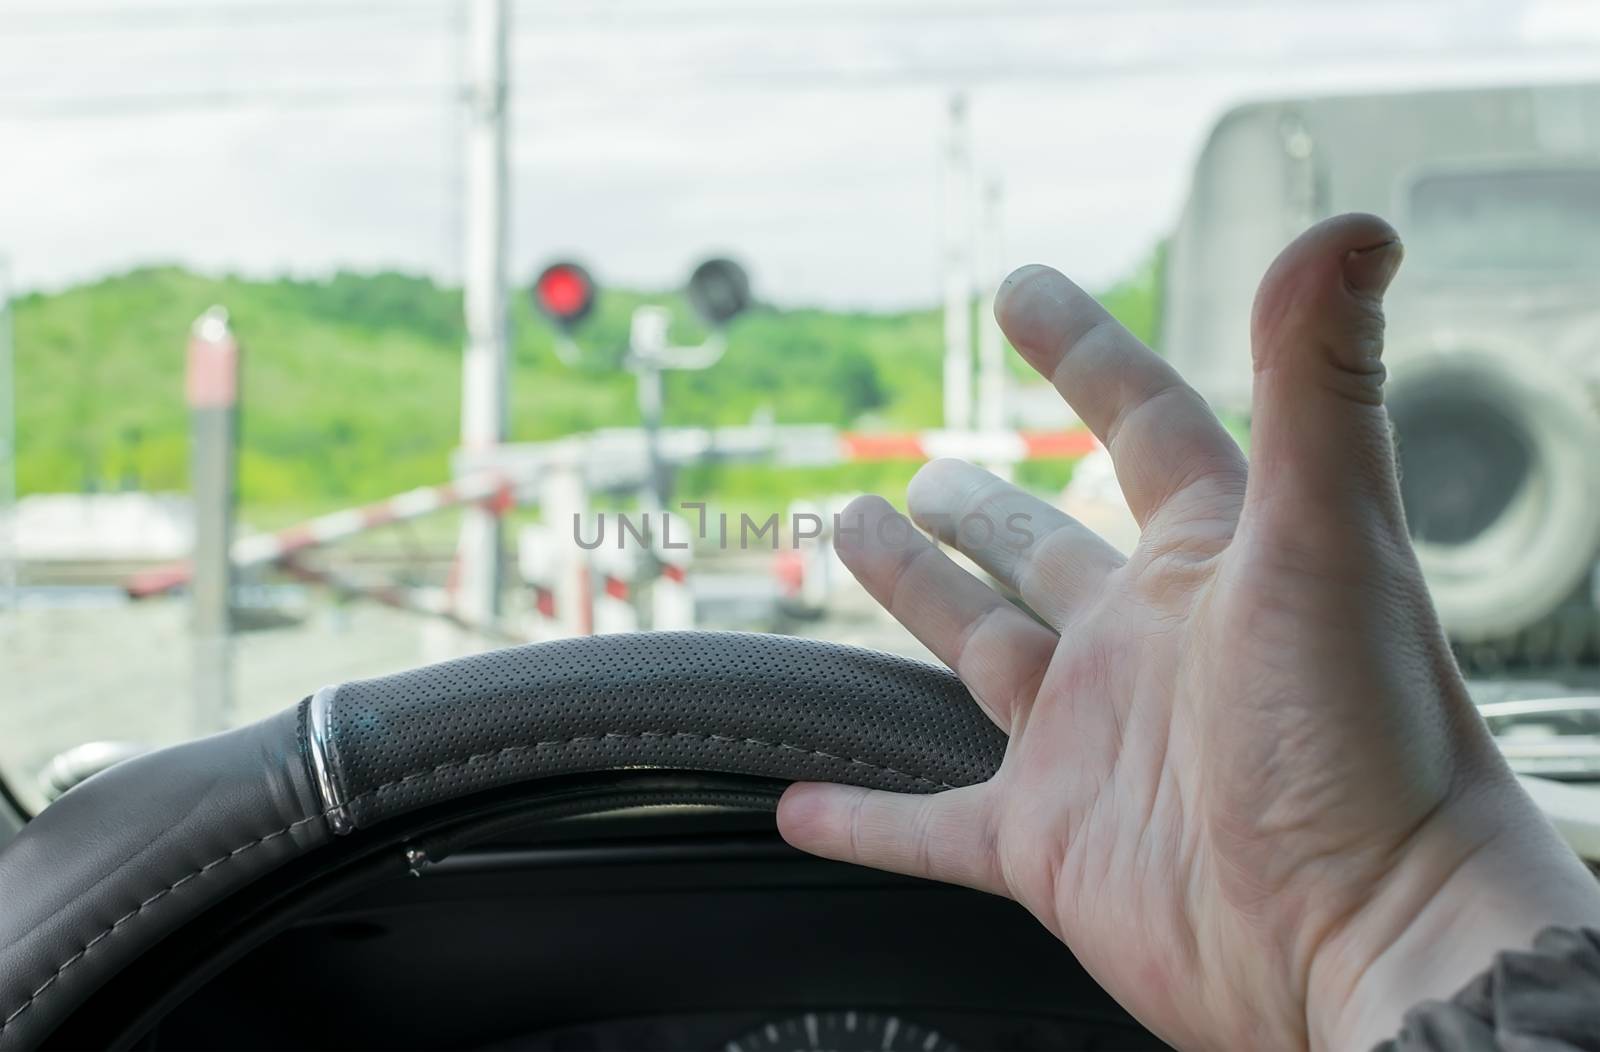 The hand of man inside the car. The car stopped in front of a closed barrier and a red traffic light before the railway crossing. Man outraged by the situation that did not have time to ride the move